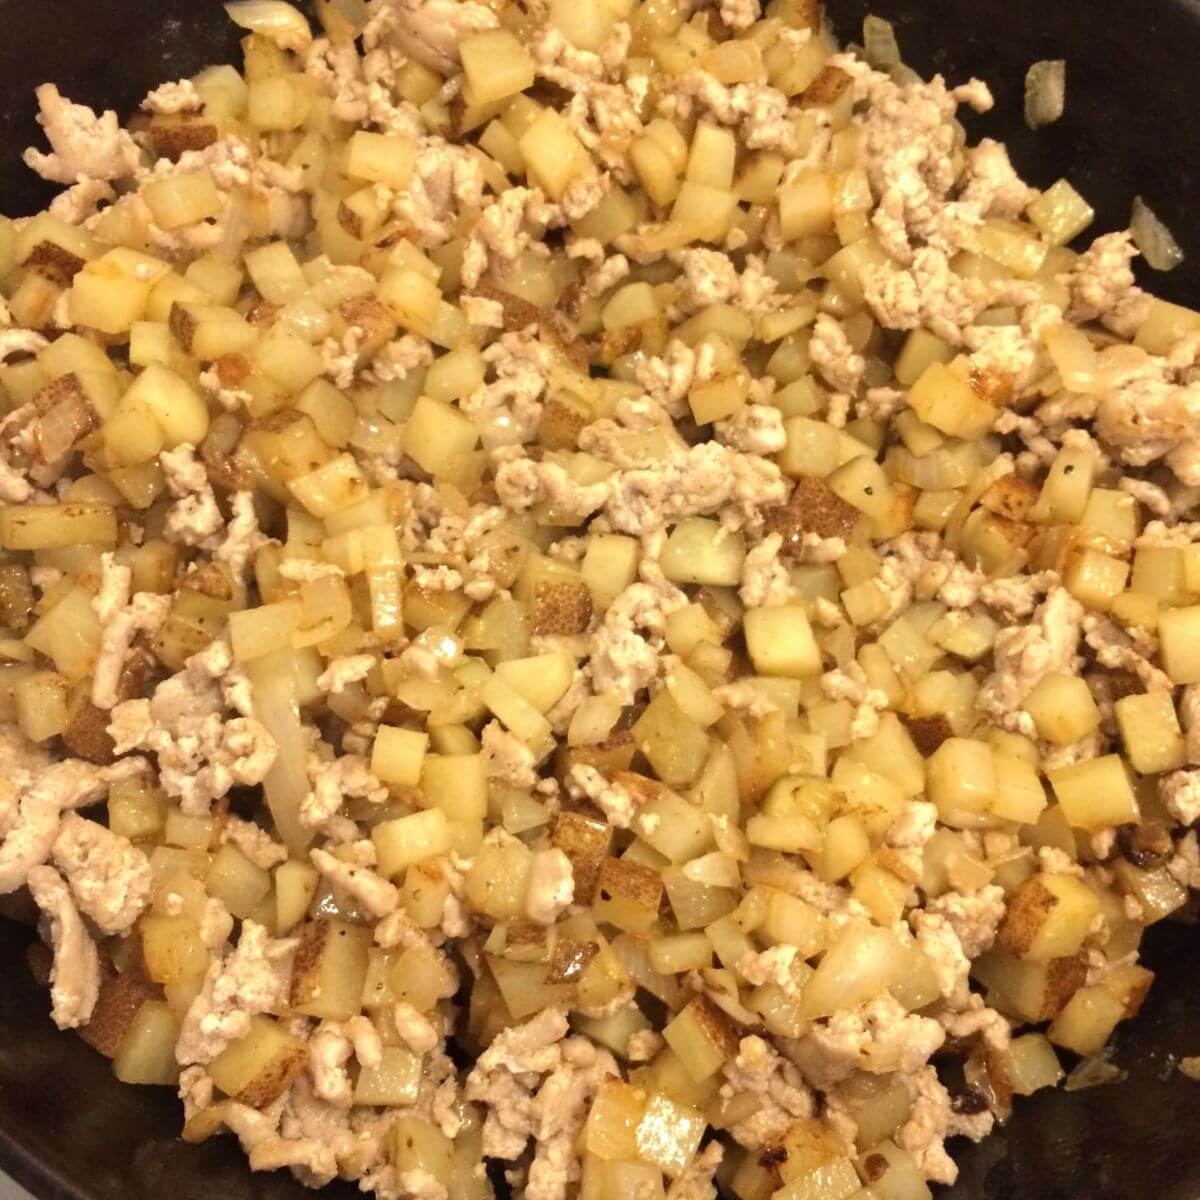 diced potatoes, onions, and cooked ground pork in a cast iron skillet